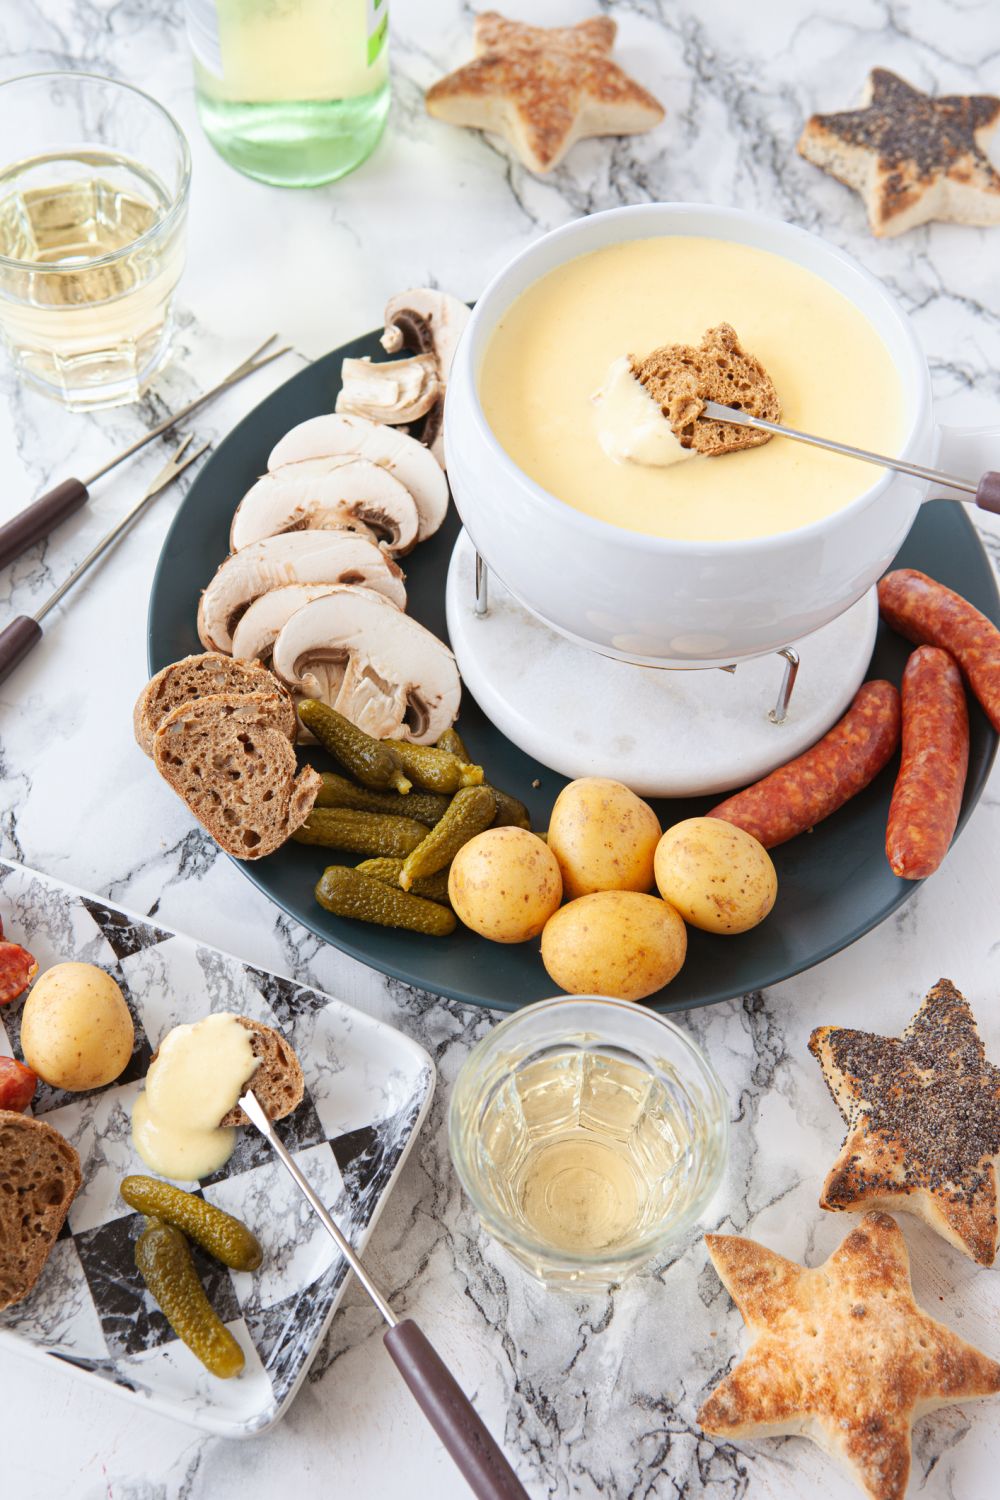 How to reheat leftover cheese fondue